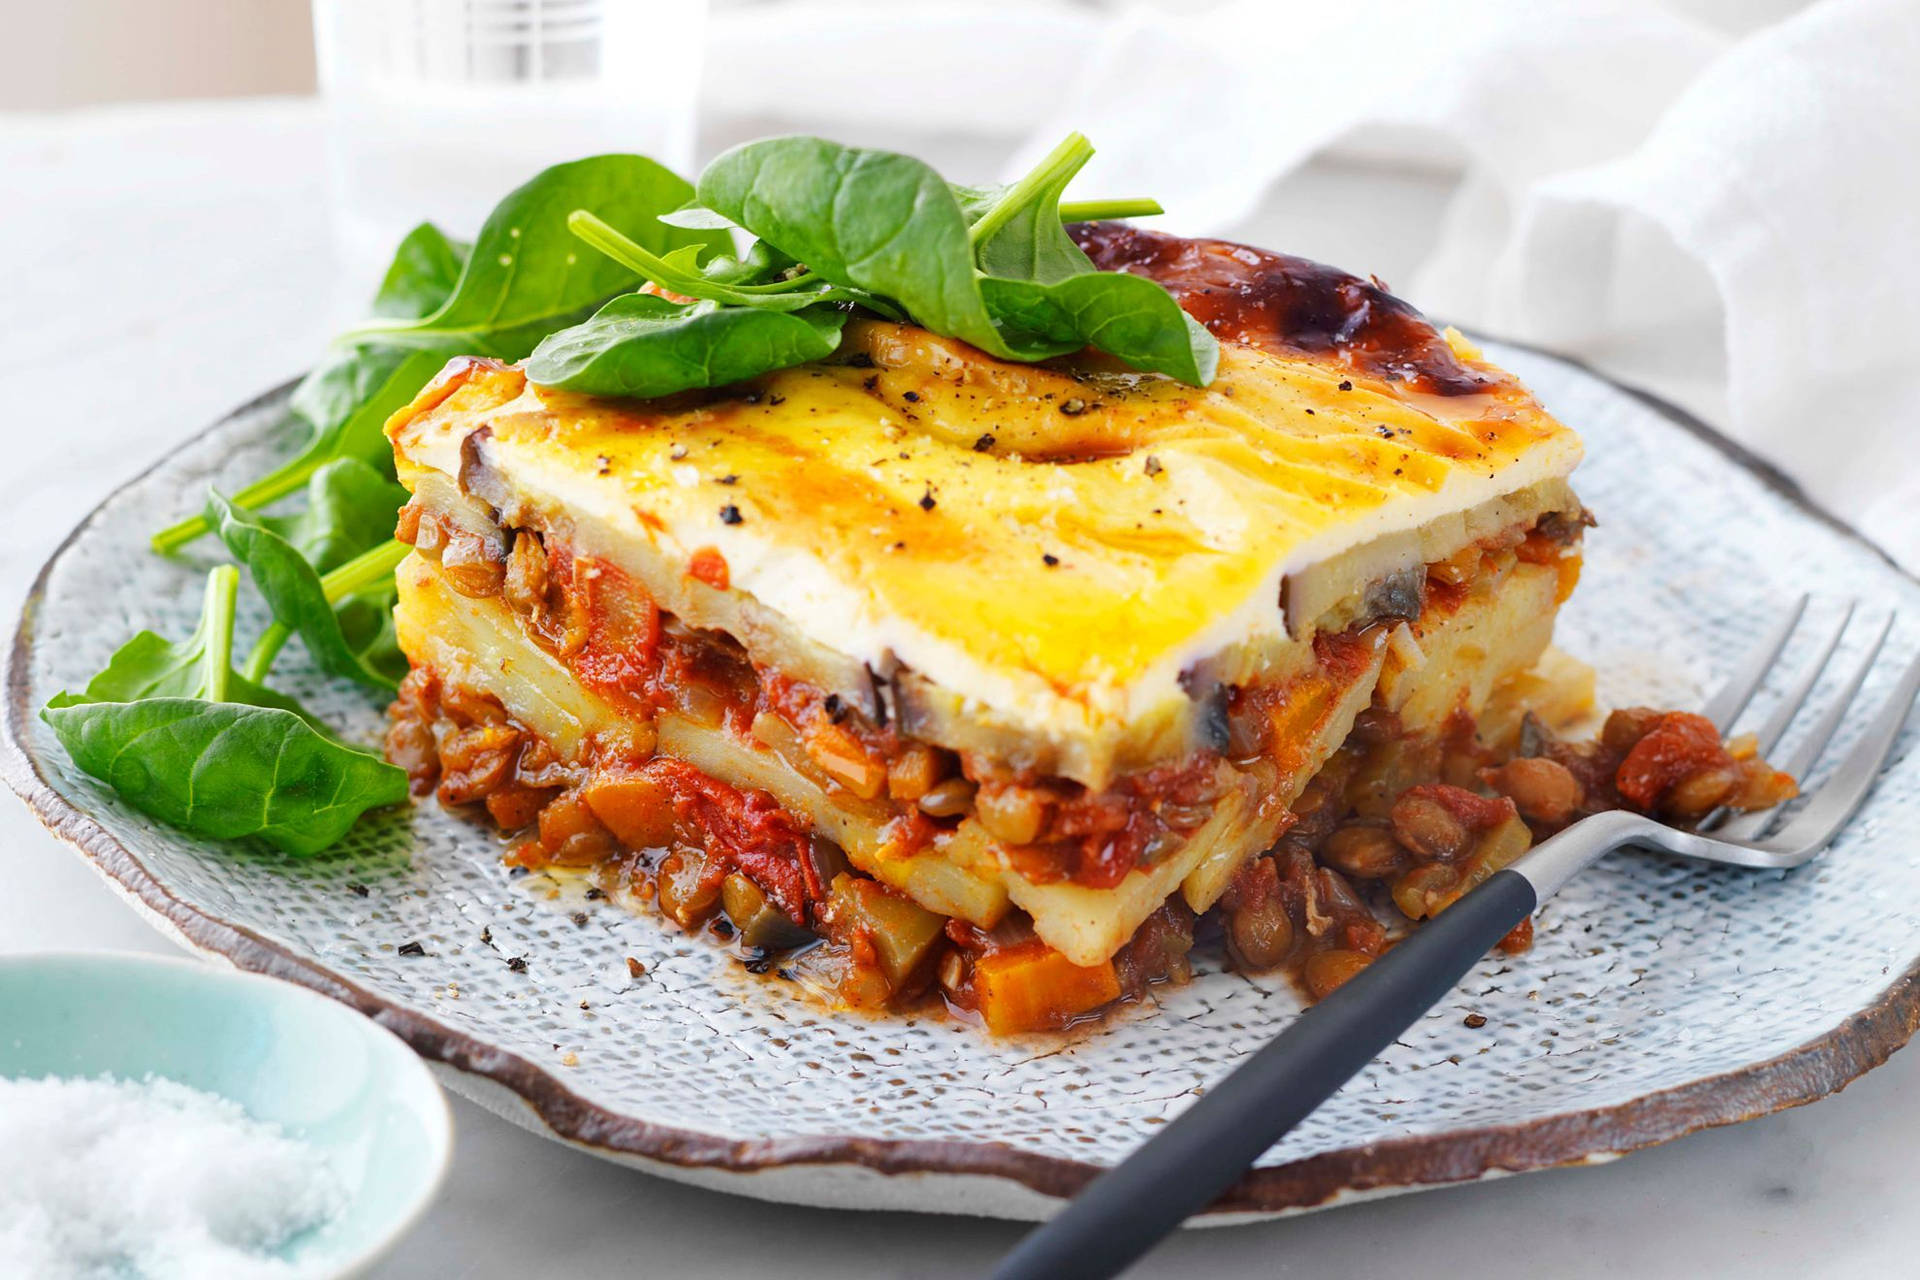 Delicious Portioned Moussaka with Veggies&Meat Wallpaper